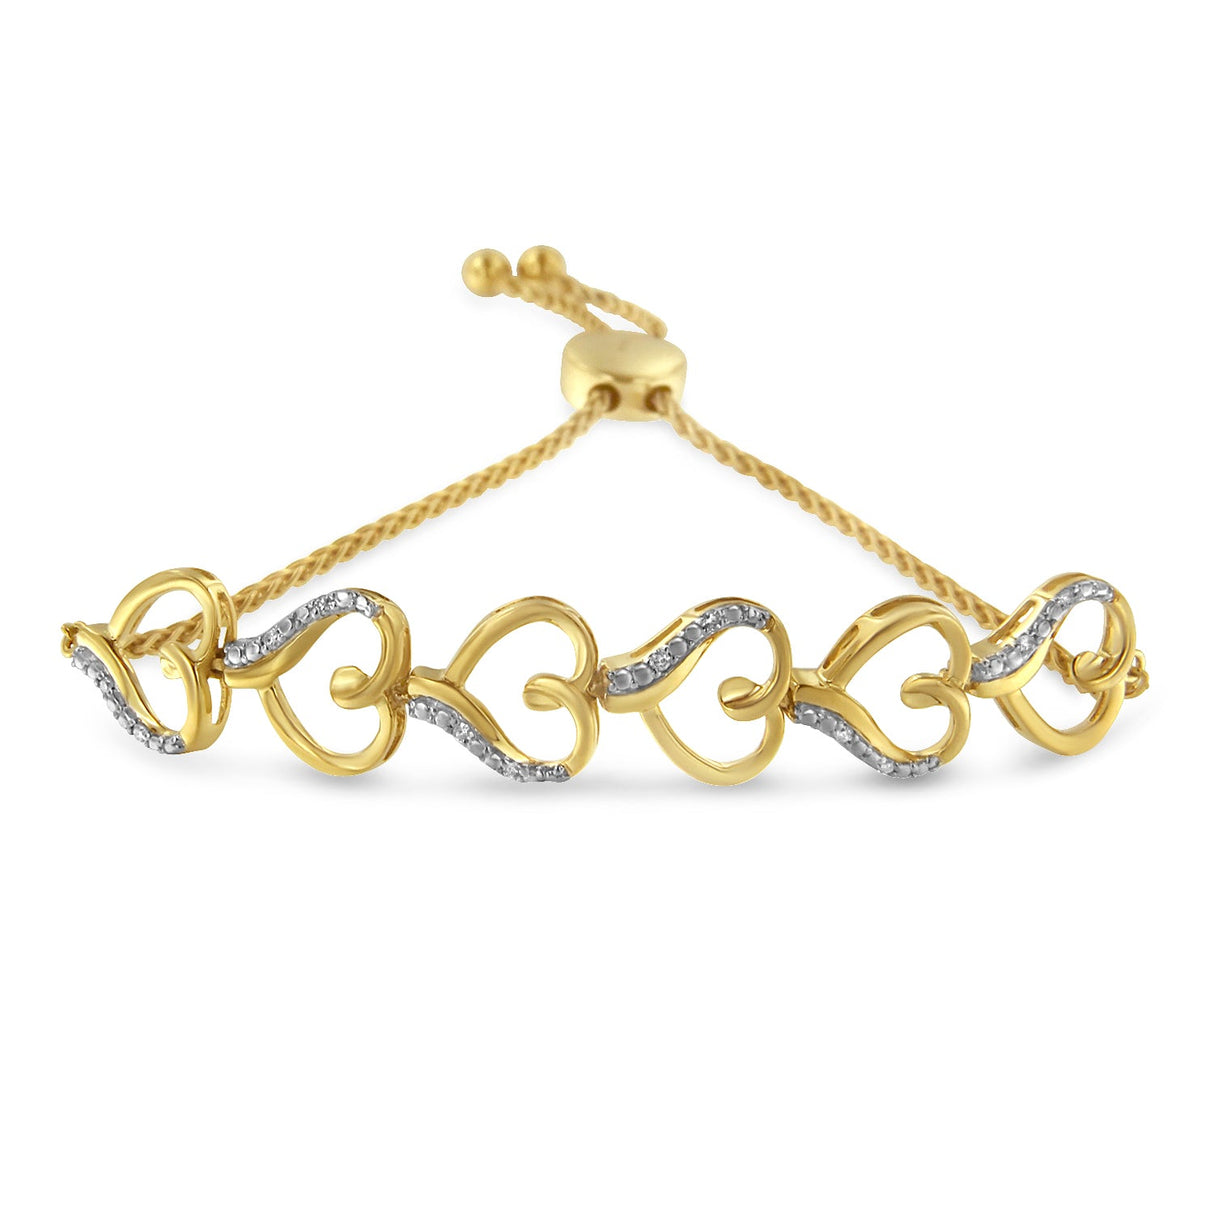 10K Yellow Gold Over .925 Sterling Silver Diamond Accented Open Hearts 6”-9” Adjustable Chain Bolo Bracelet (H-I Color, I2-I3 Clarity) - Tuesday Morning-Bracelets